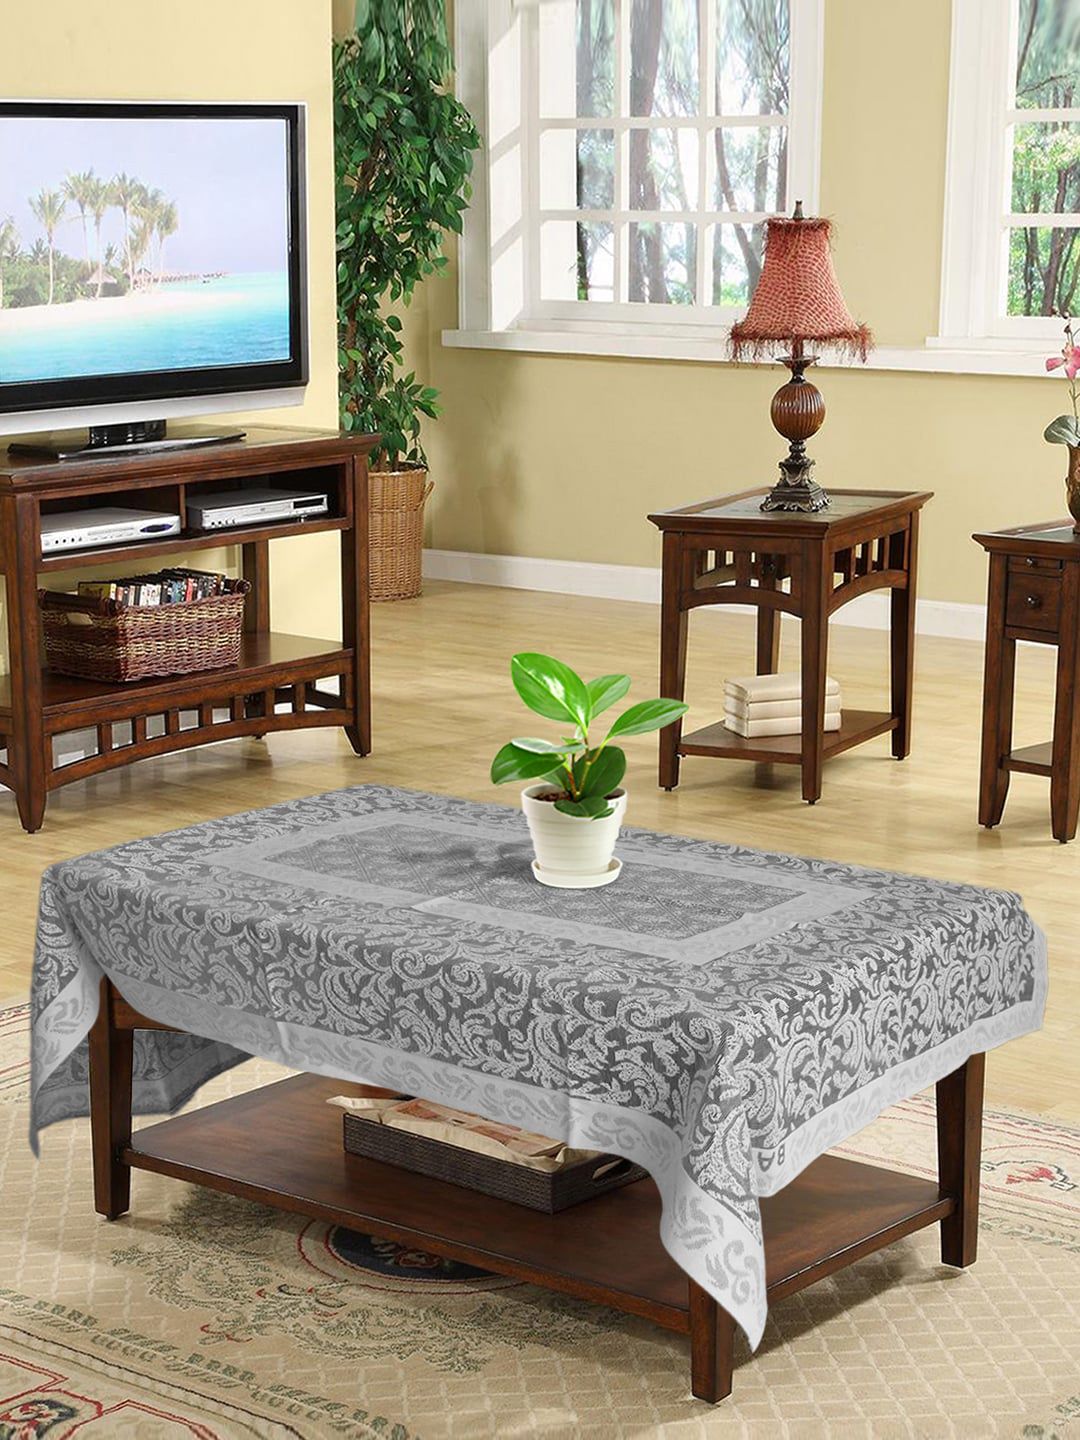 Kuber Industries Grey & White Floral Printed 4-Seater Rectangle Cotton Table Cover Price in India